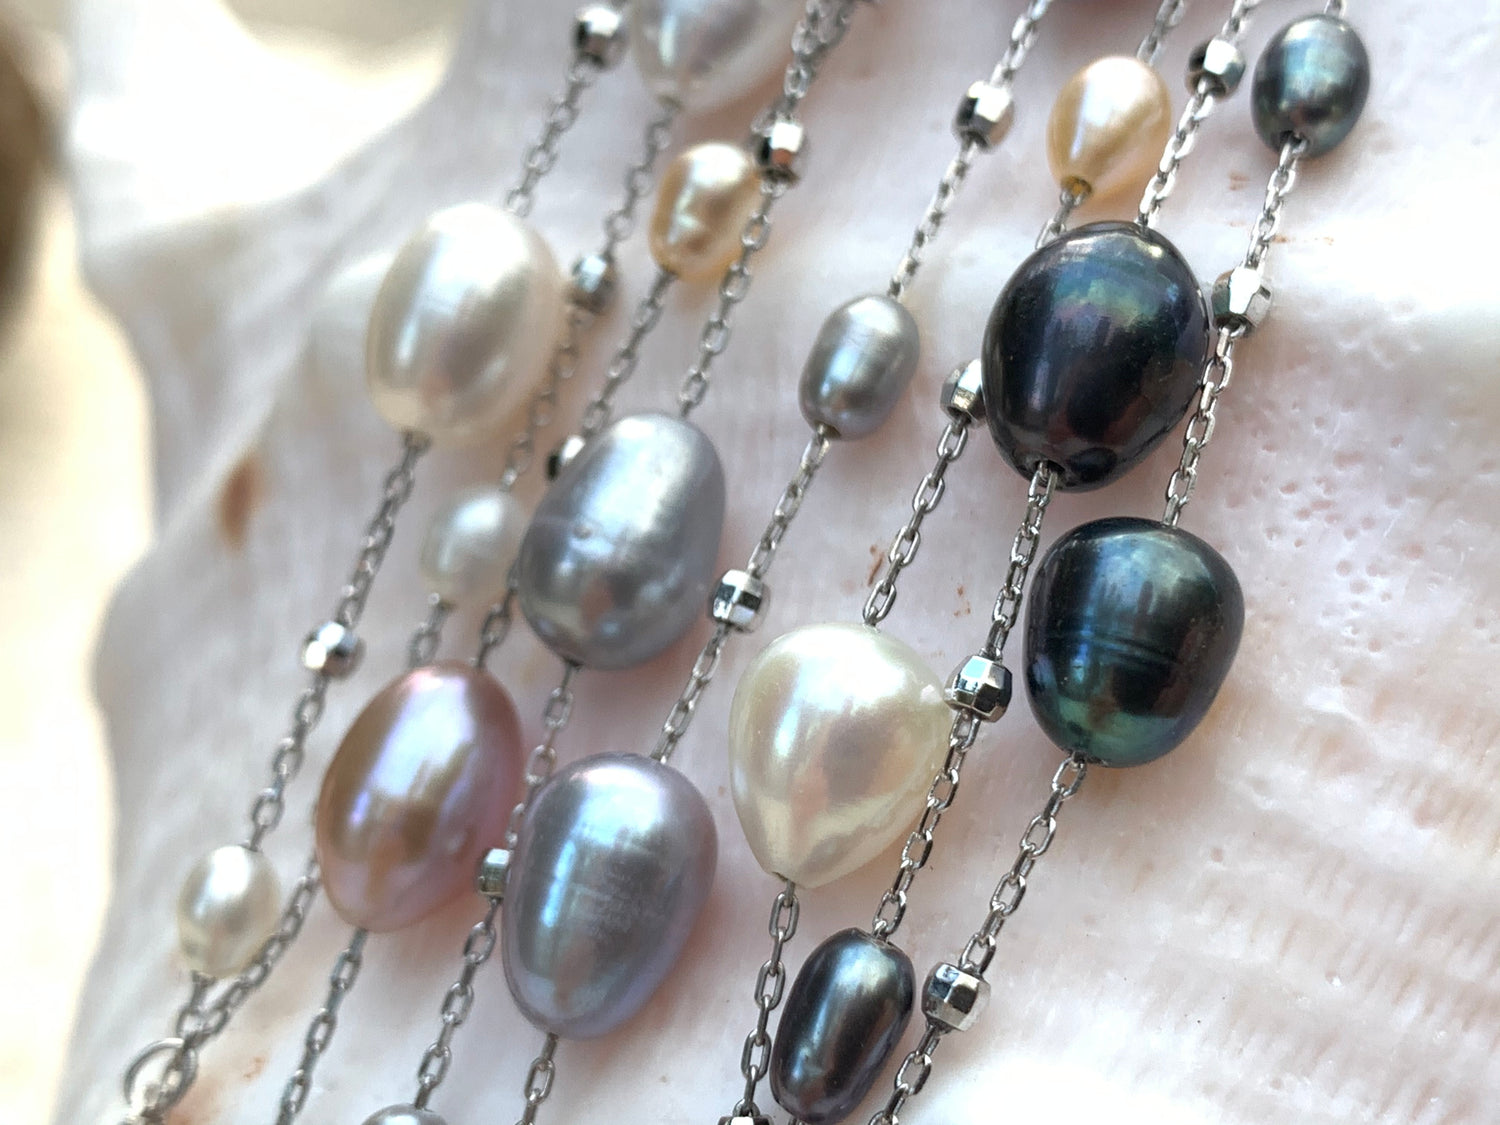 Close up of Dew drop freshwater pearl necklaces with 36" chain length.